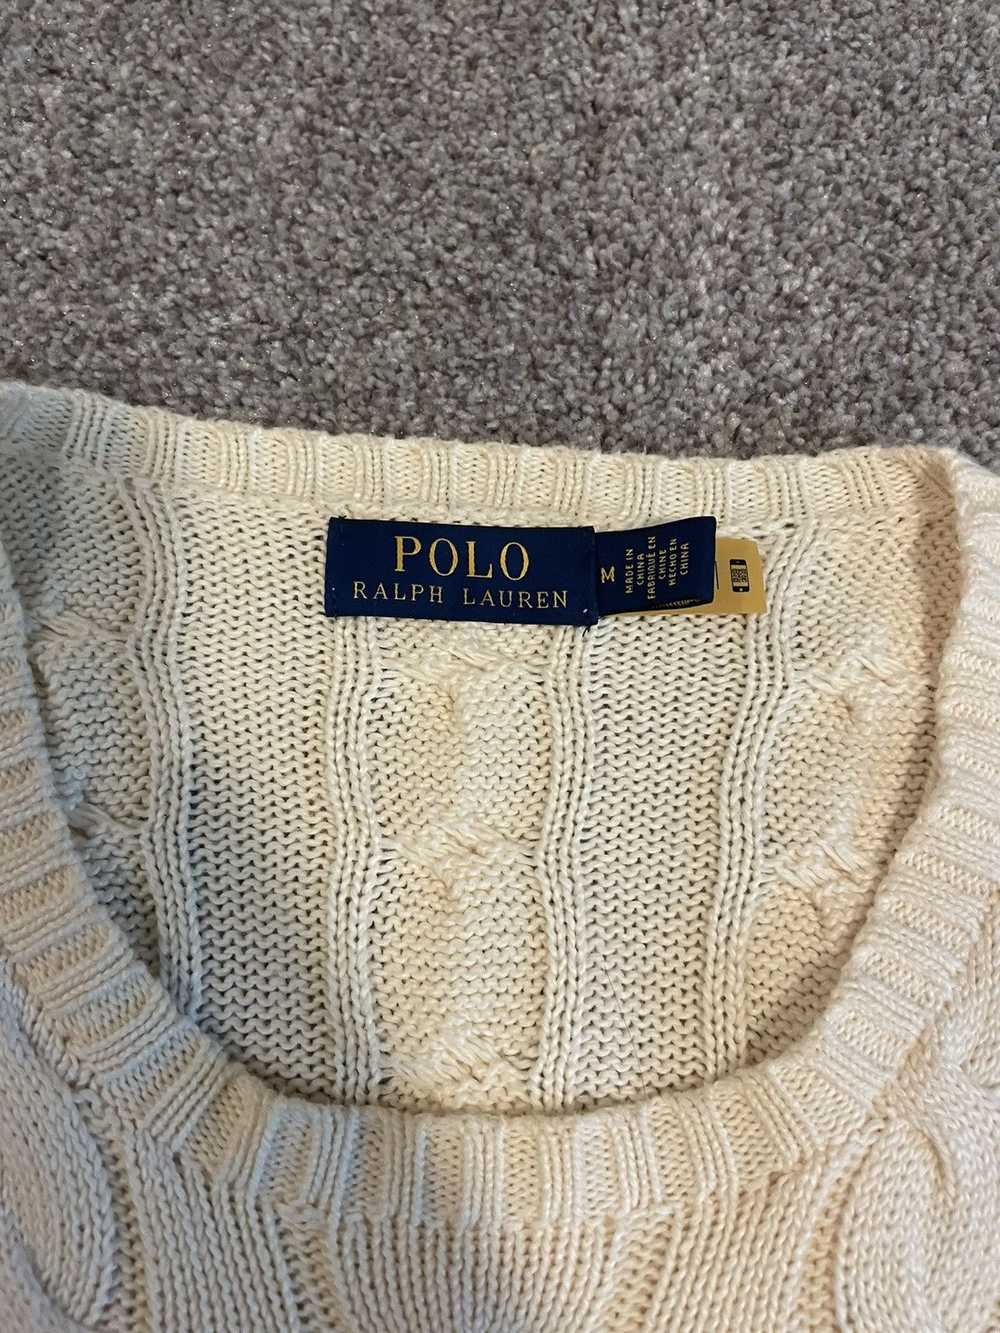 Polo Ralph Lauren Cable Knit Sweater Size M - image 3